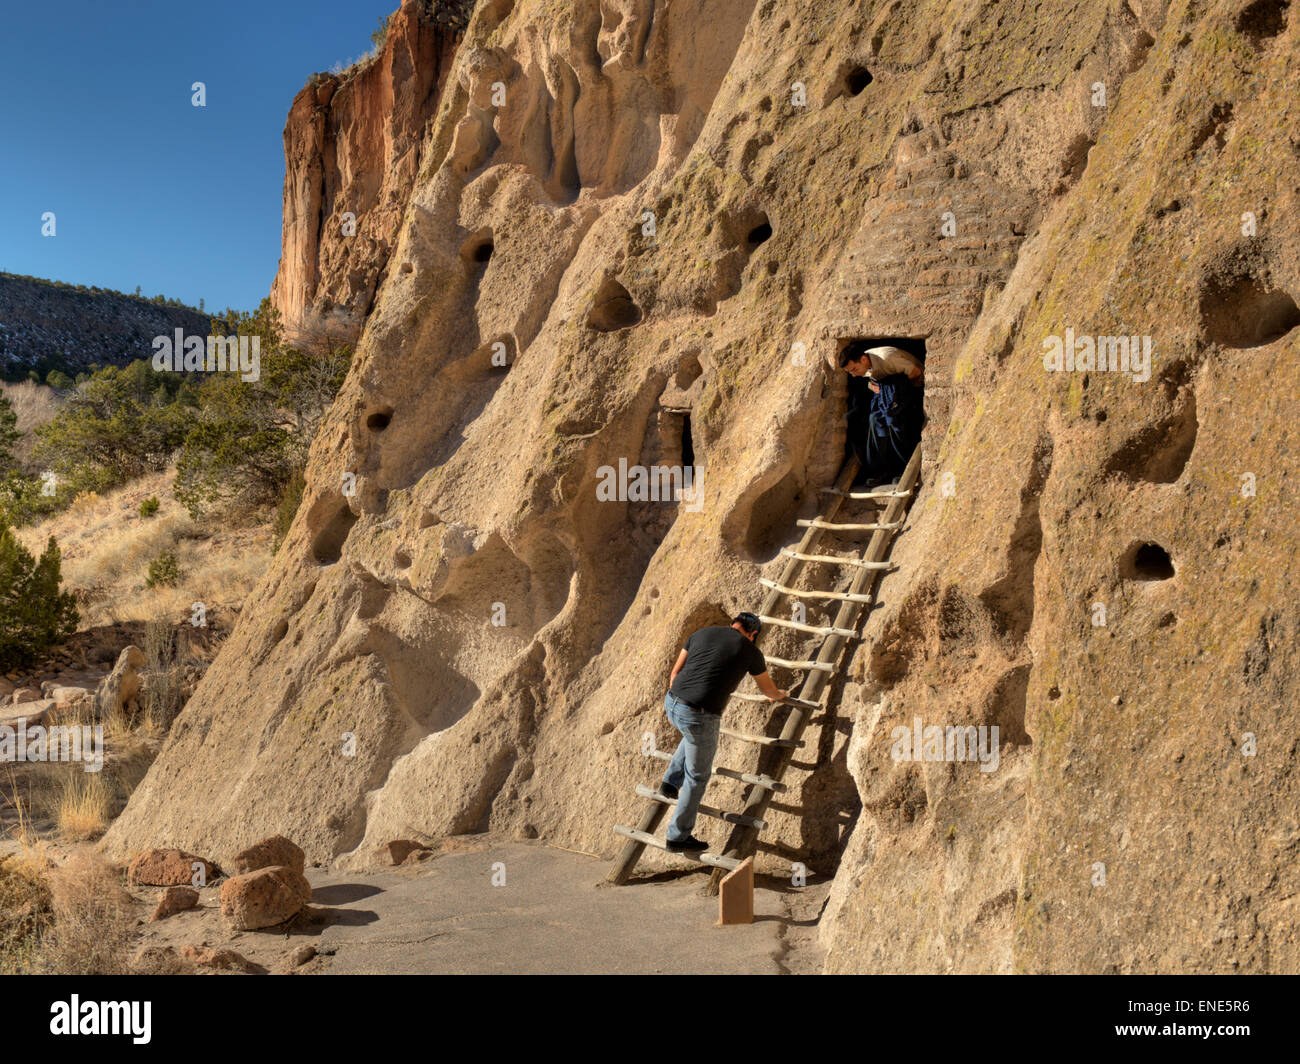 Two tourists explore one of the cliff dwellings at Bandelier National Monument, near Los Alamos, New Mexico Stock Photo